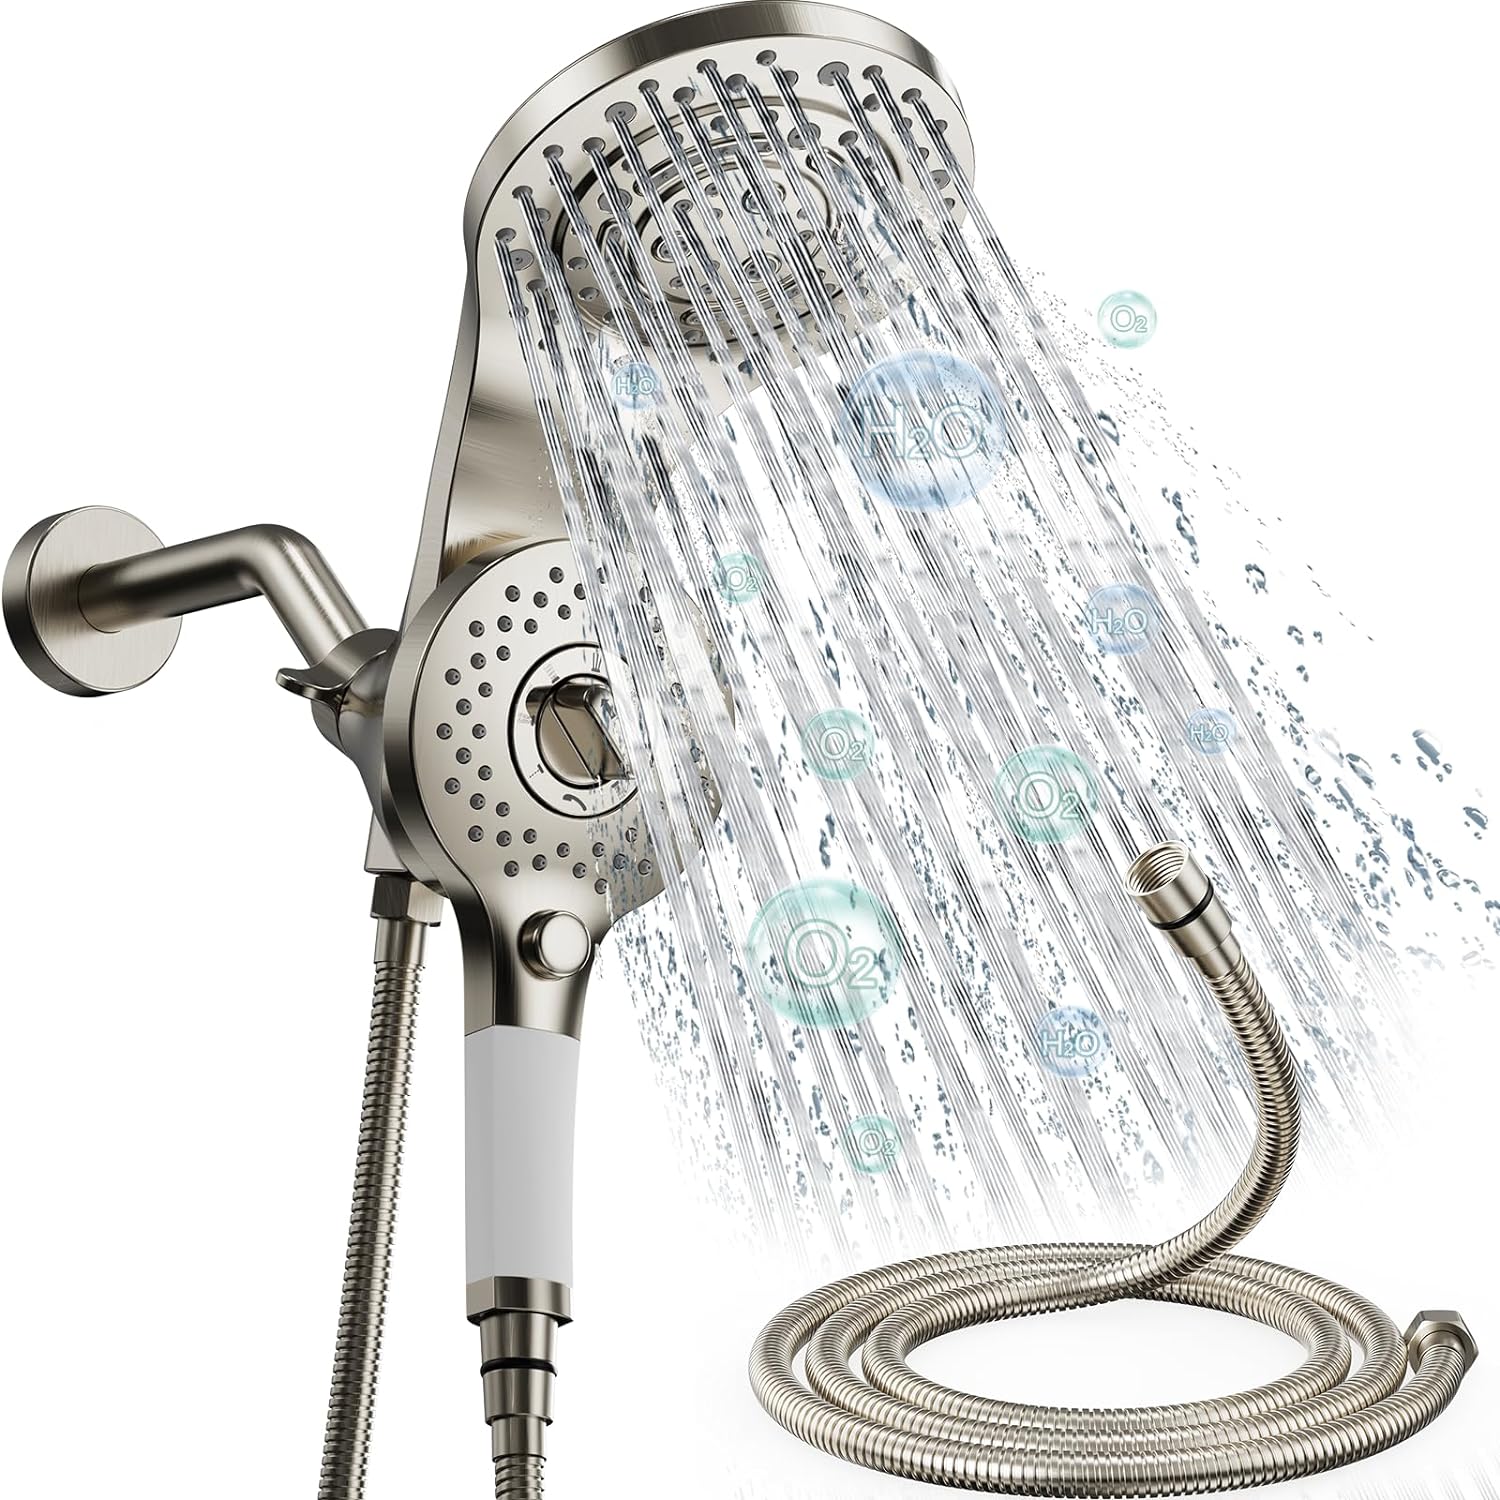 TWIMOST Dual Shower Head Combo: High Pressure 2 IN 1 Rainfall Shower Heads with Handheld Spray Combo - Magnetic Double Showerhead with 9 Spray Modes include 72 Stainless Steel Hose Brushed Nickel